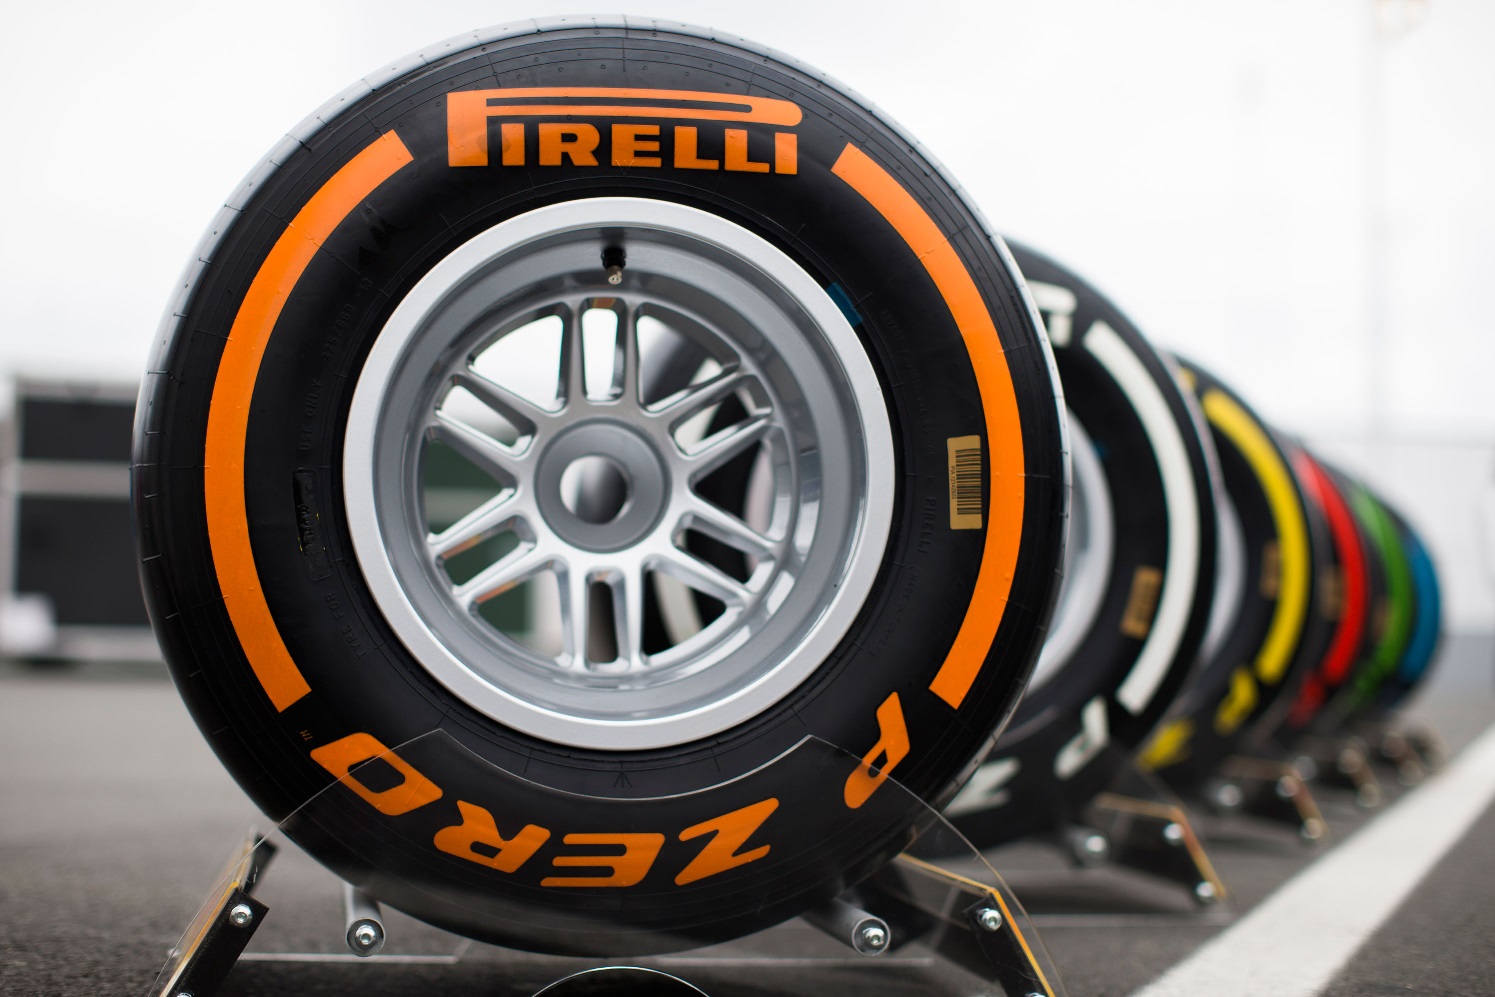 Pirelli will need to test 2017 tires